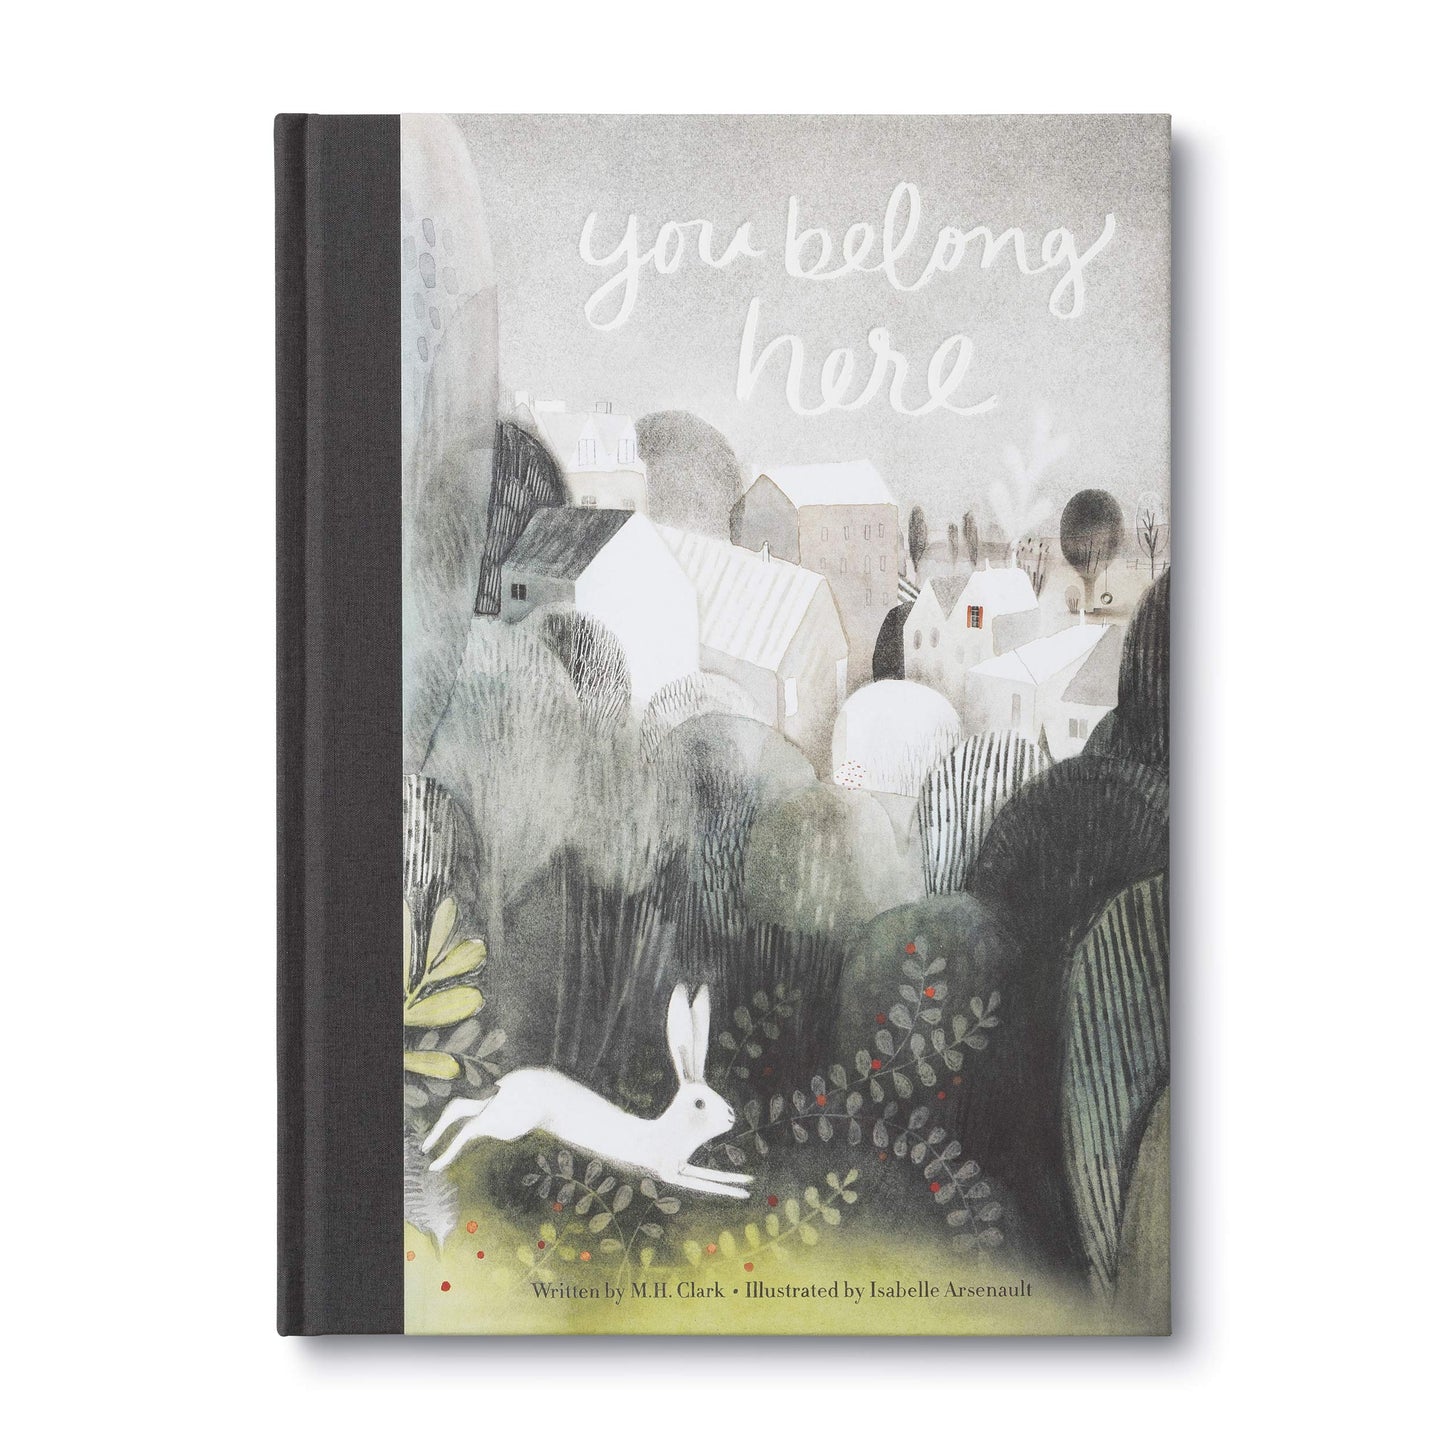 You Belong Here by MH Clark